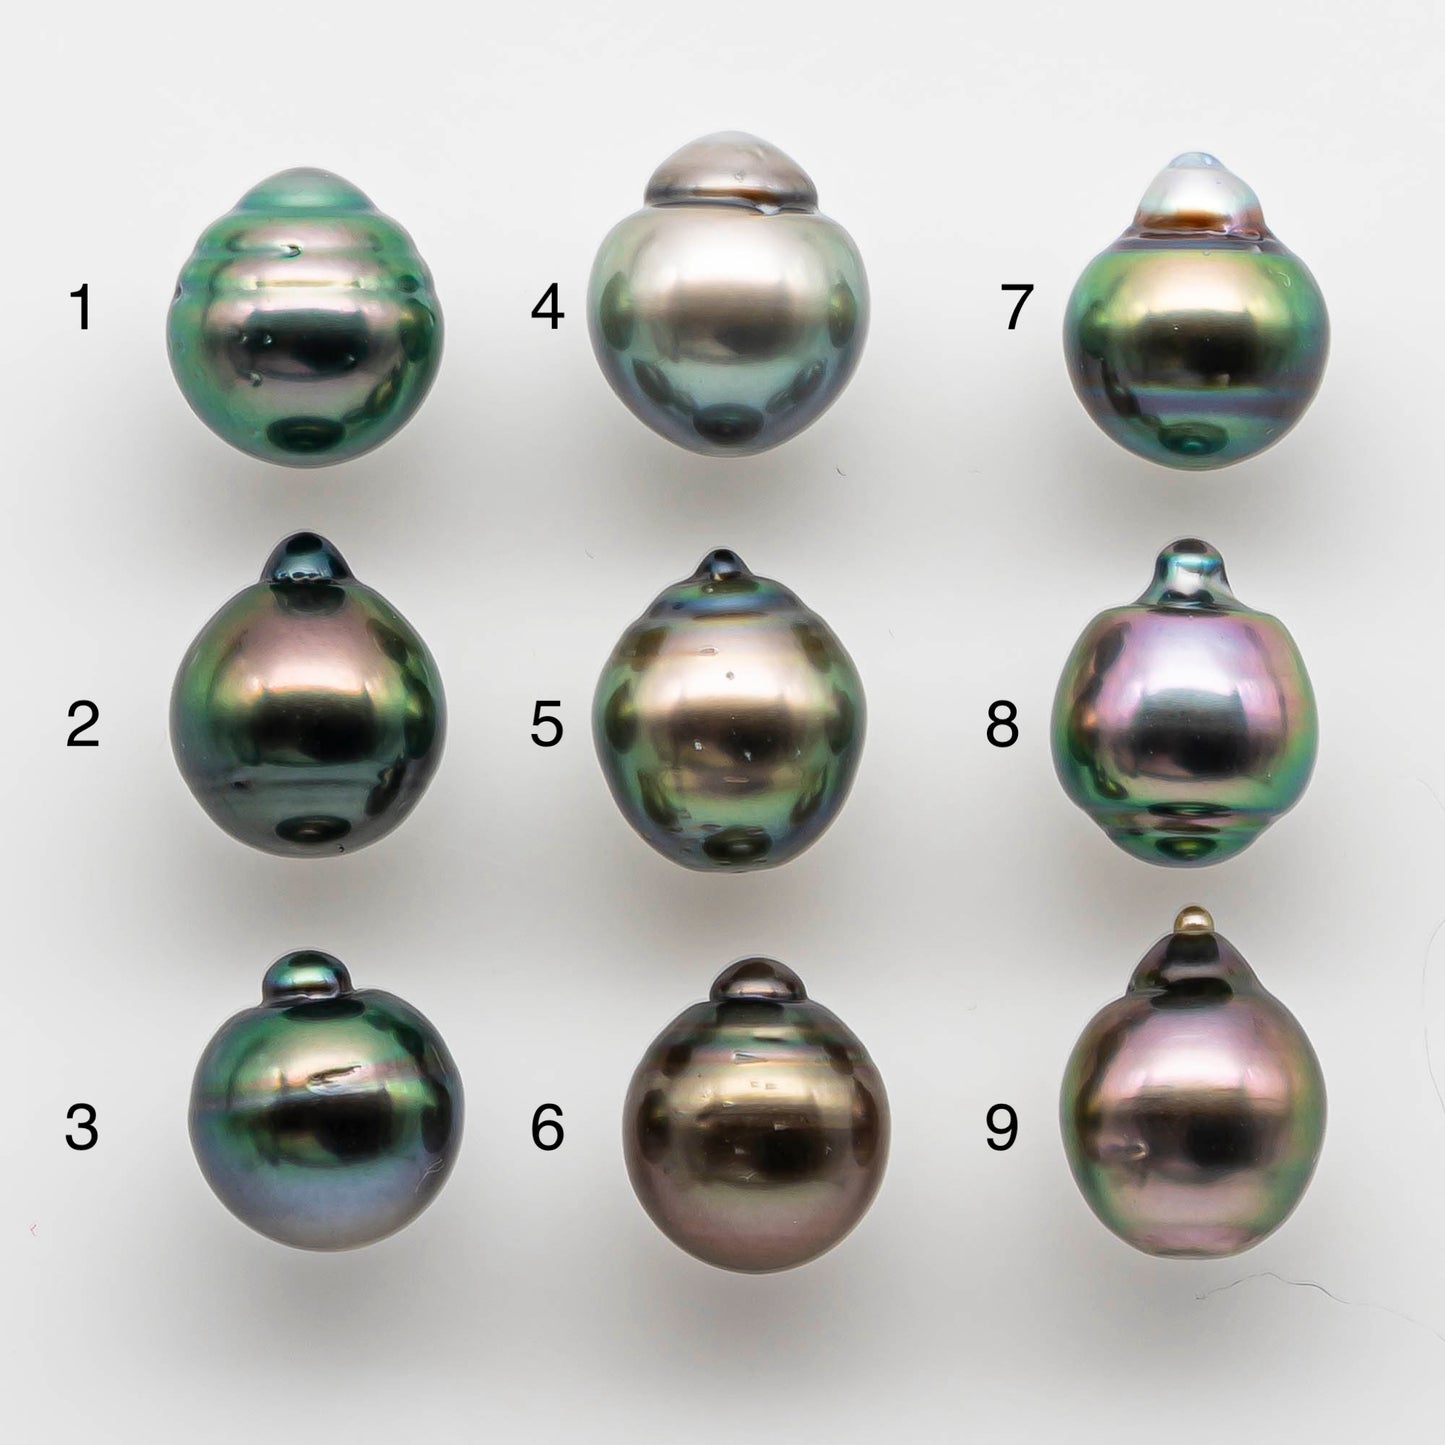 10-11mm Tahitian Pearl Drop with High Luster and Natural Color with Minor Blemishes, Loose Single Piece Undrilled, SKU # 1822TH